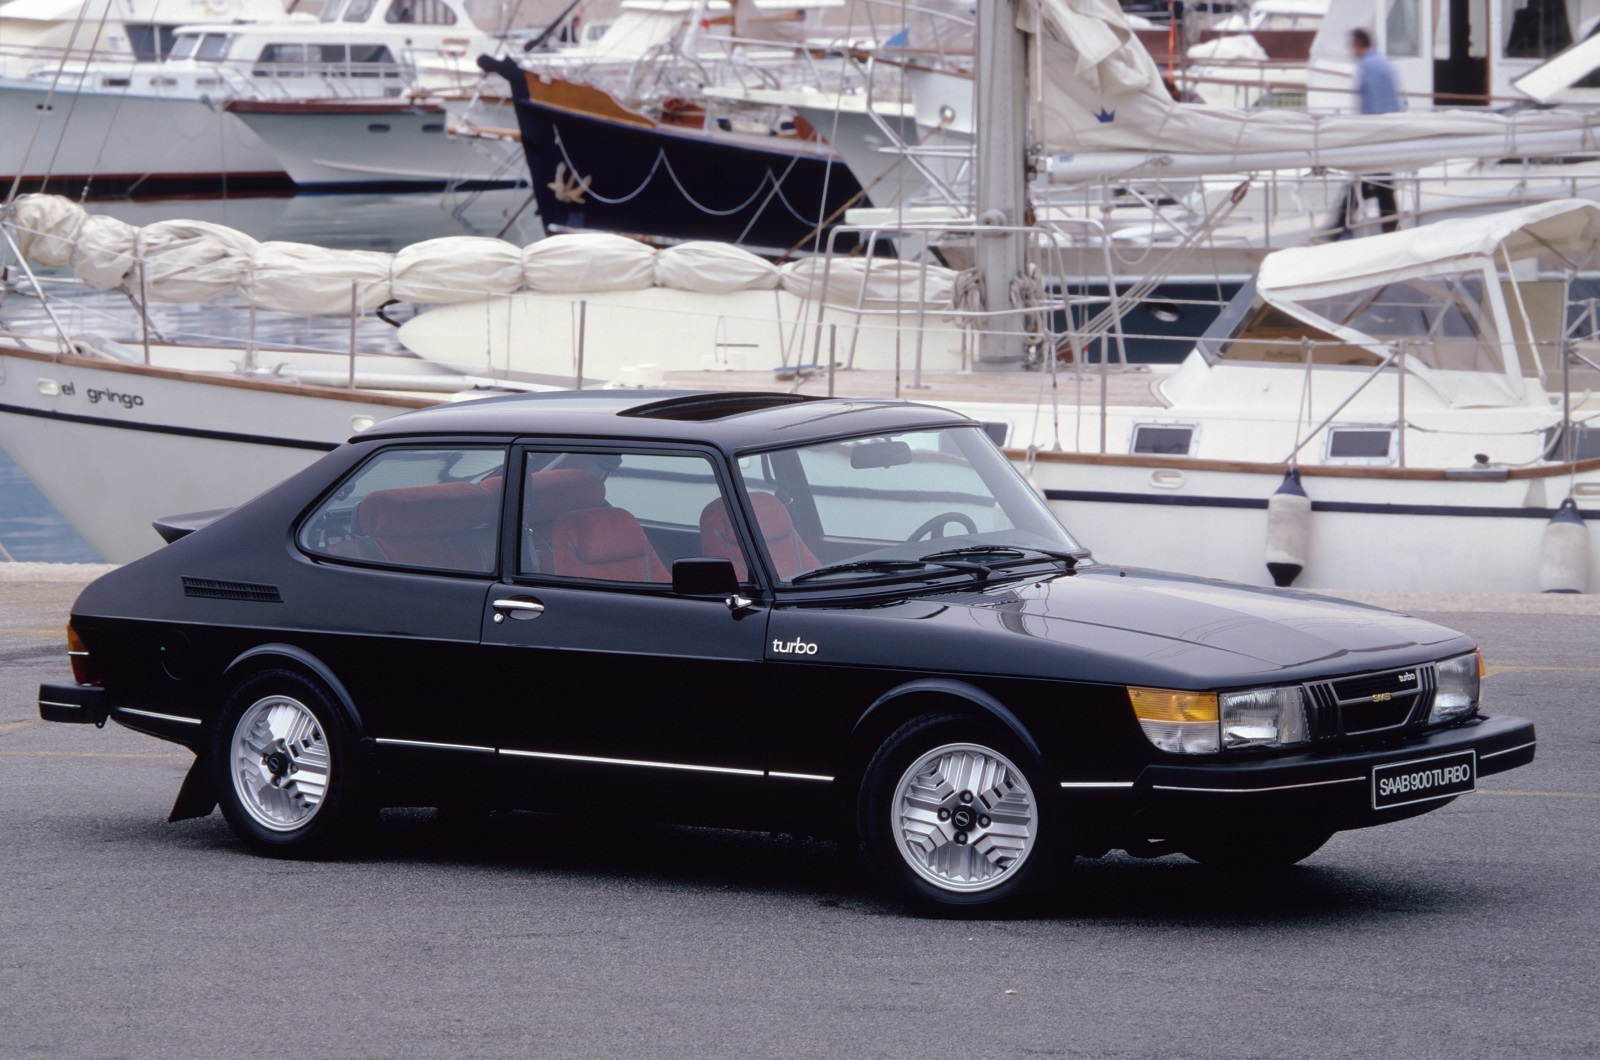 <p>Saab is well known for its unique design choices that made its owners fiercely loyal to the end of its life. That was evident nowhere more obviously than with the 900 range that was launched in 1978 and racked up more than <strong>900,00 sales</strong> for the first model and 273,568 for the 1993 <strong>New Generation</strong> version.</p><p>While safety, space and comfort were big draws, performance was another Saab speciality and almost a <strong>quarter</strong> of 900 sales went to the Turbo models.</p>